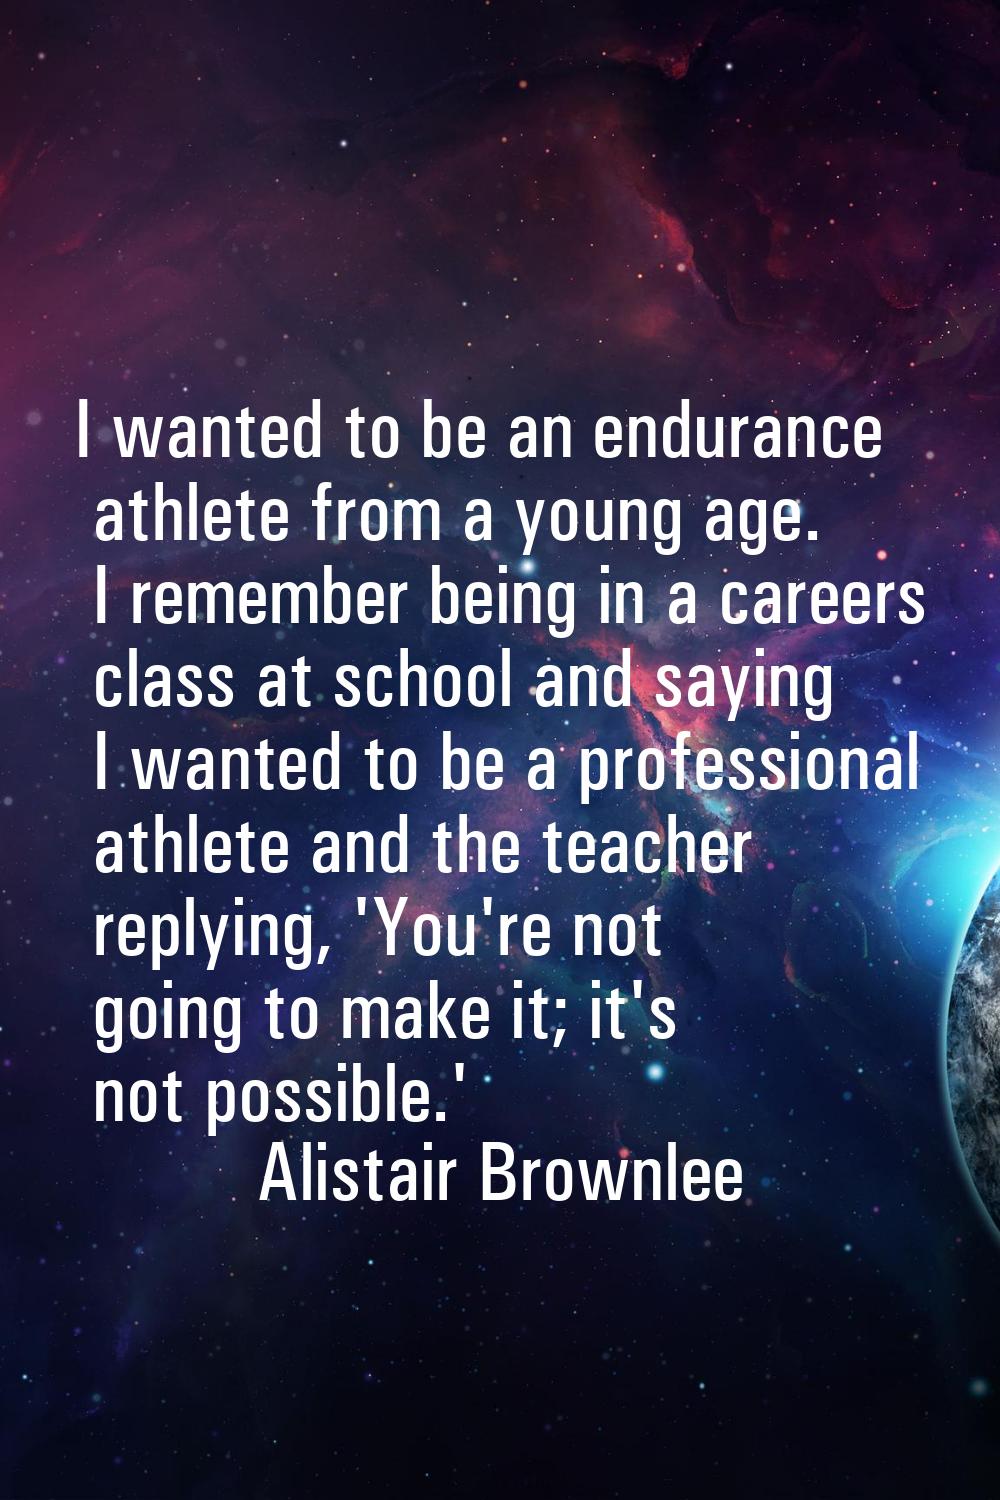 I wanted to be an endurance athlete from a young age. I remember being in a careers class at school